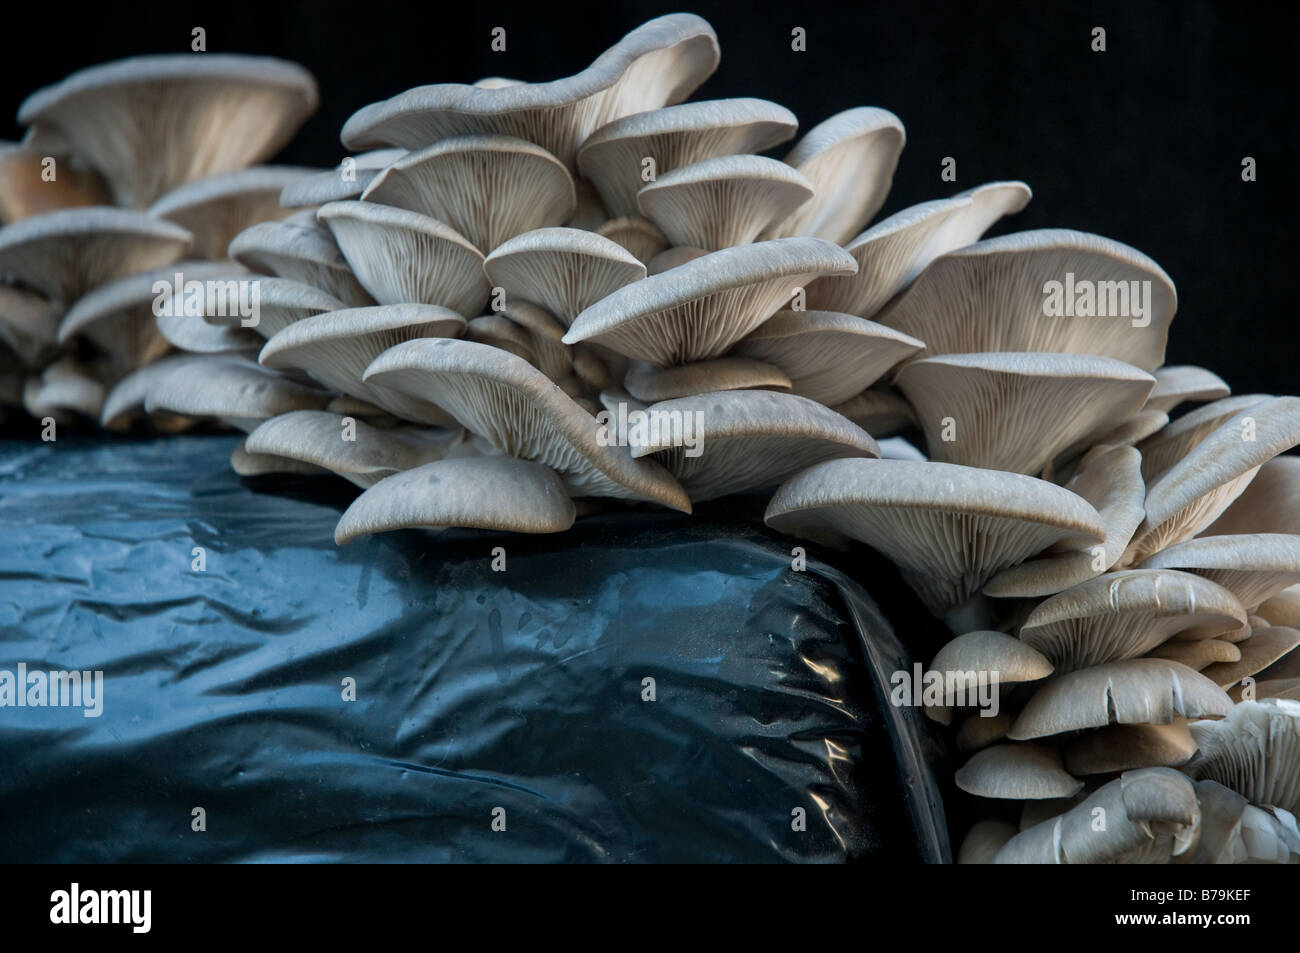 Edible mushrooms cluster (pleurotus ostreatus) as cultivated in a compost bag Stock Photo